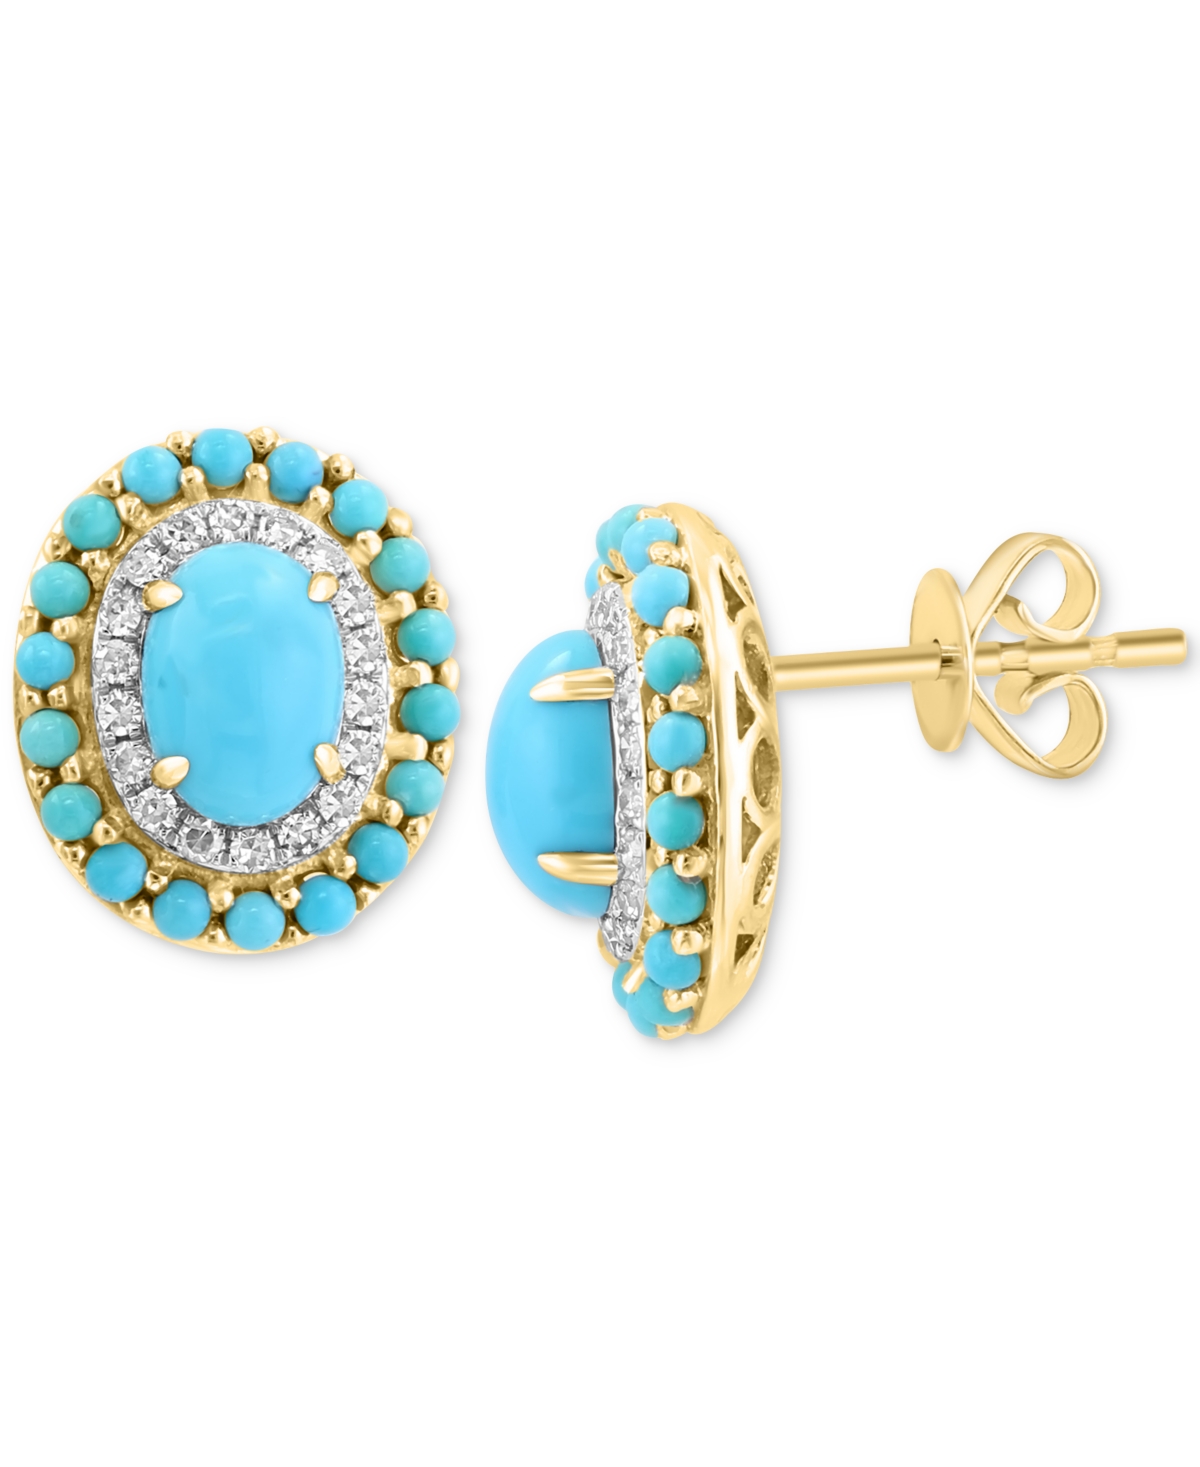 Effy Collection Effy Turquoise & Diamond (1/6 Ct. T.w.) Halo Stud Earrings In 14k Gold